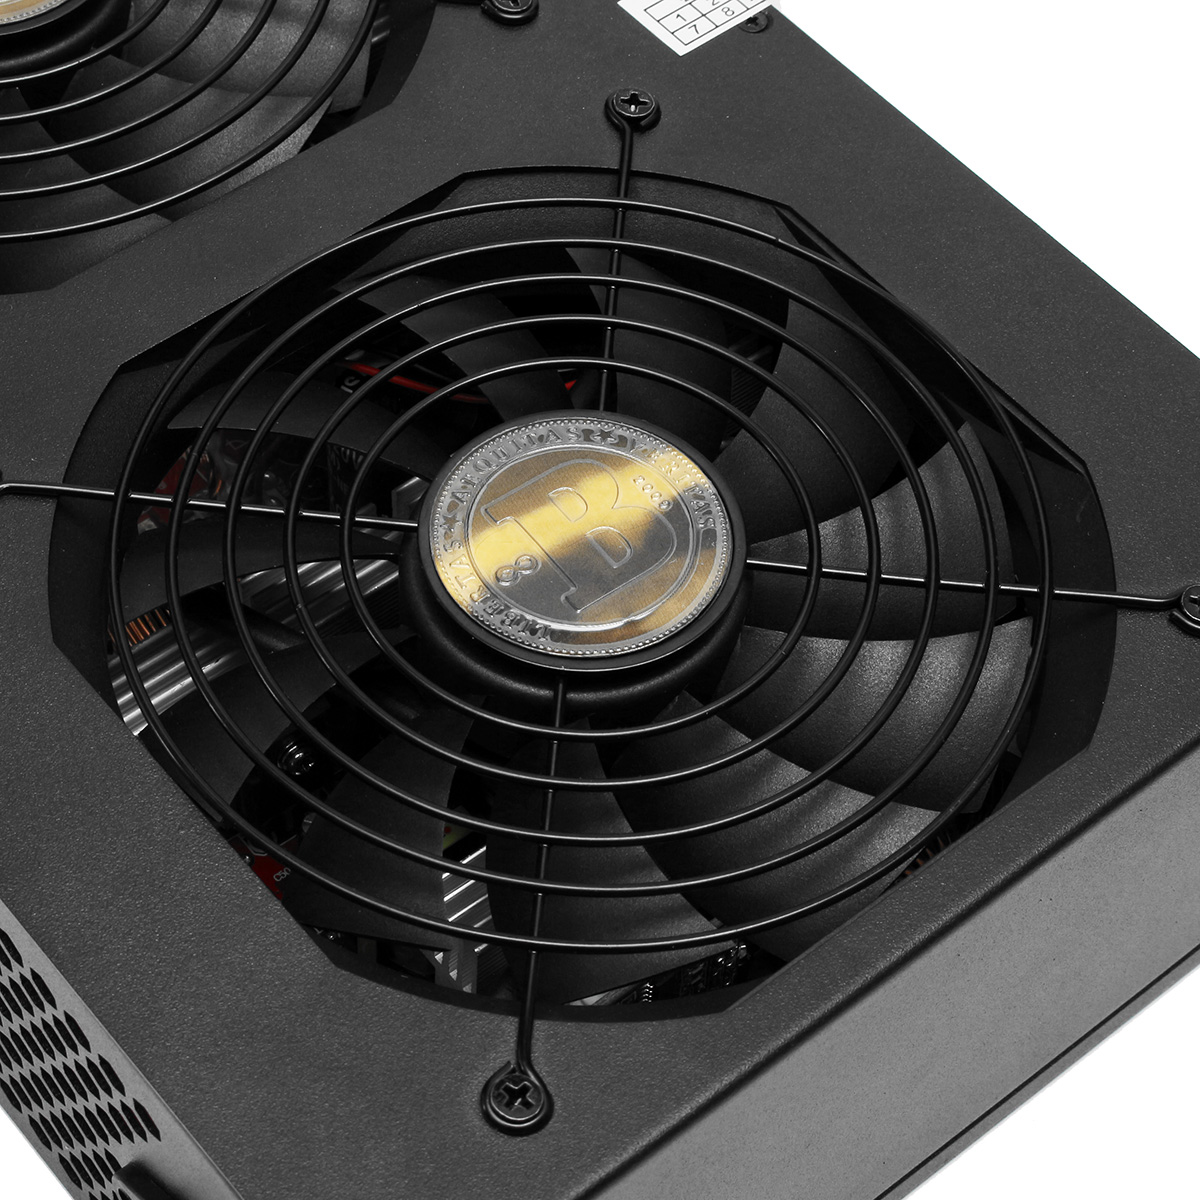 Find 3450W Miner Power Supply 140mm Cooling Fan ATX 12V Version 2 31 Computer Power Supply Mining for BTC Bitcoin Mining Server for Sale on Gipsybee.com with cryptocurrencies